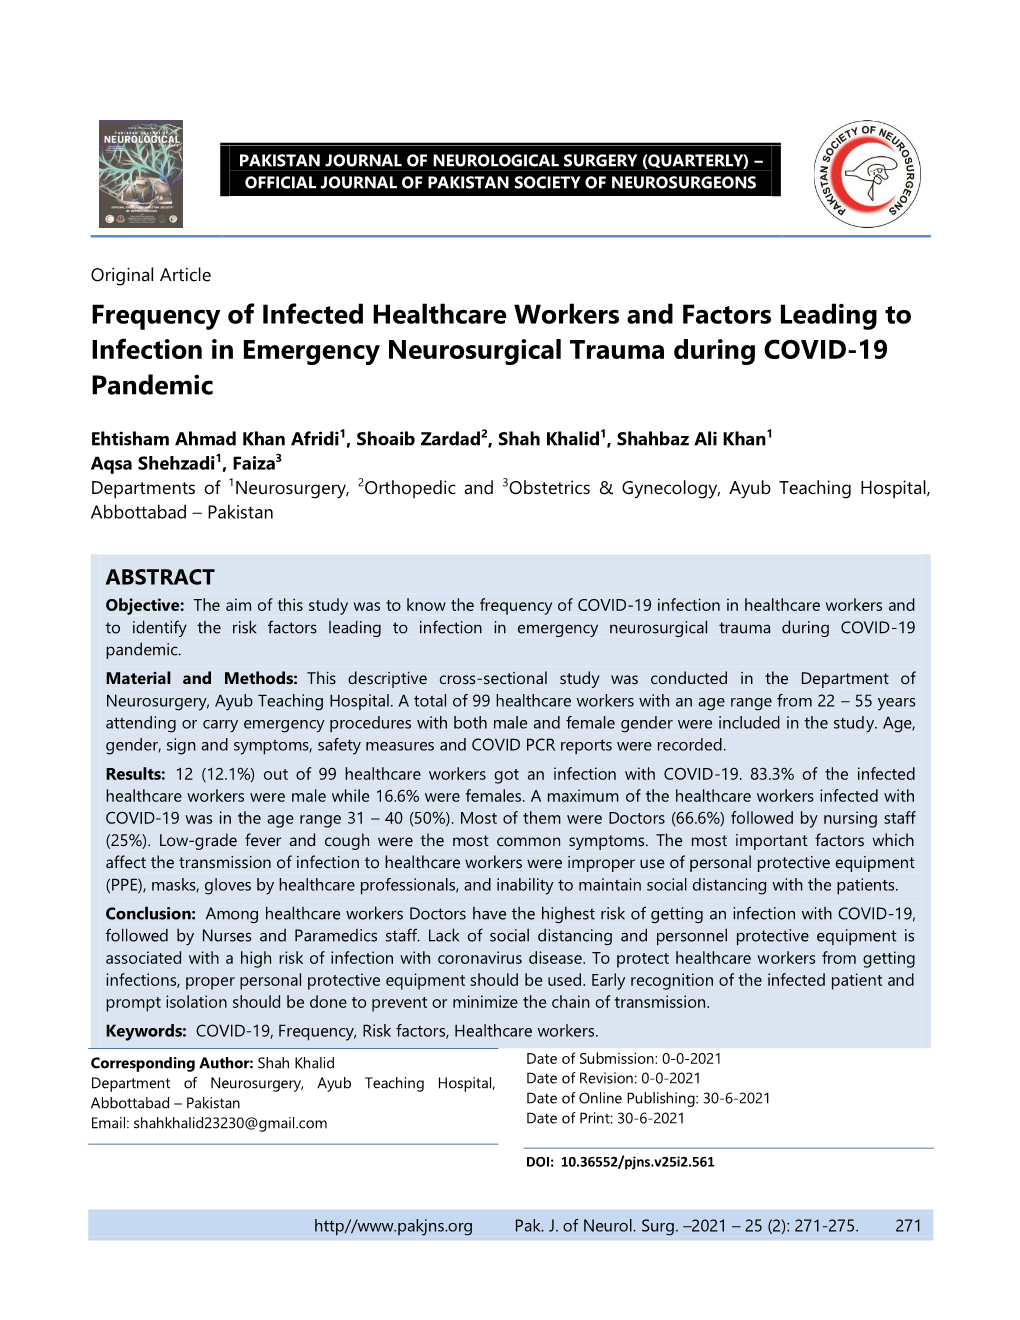 Frequency of Infected Healthcare Workers and Factors Leading to Infection in Emergency Neurosurgical Trauma During COVID-19 Pandemic